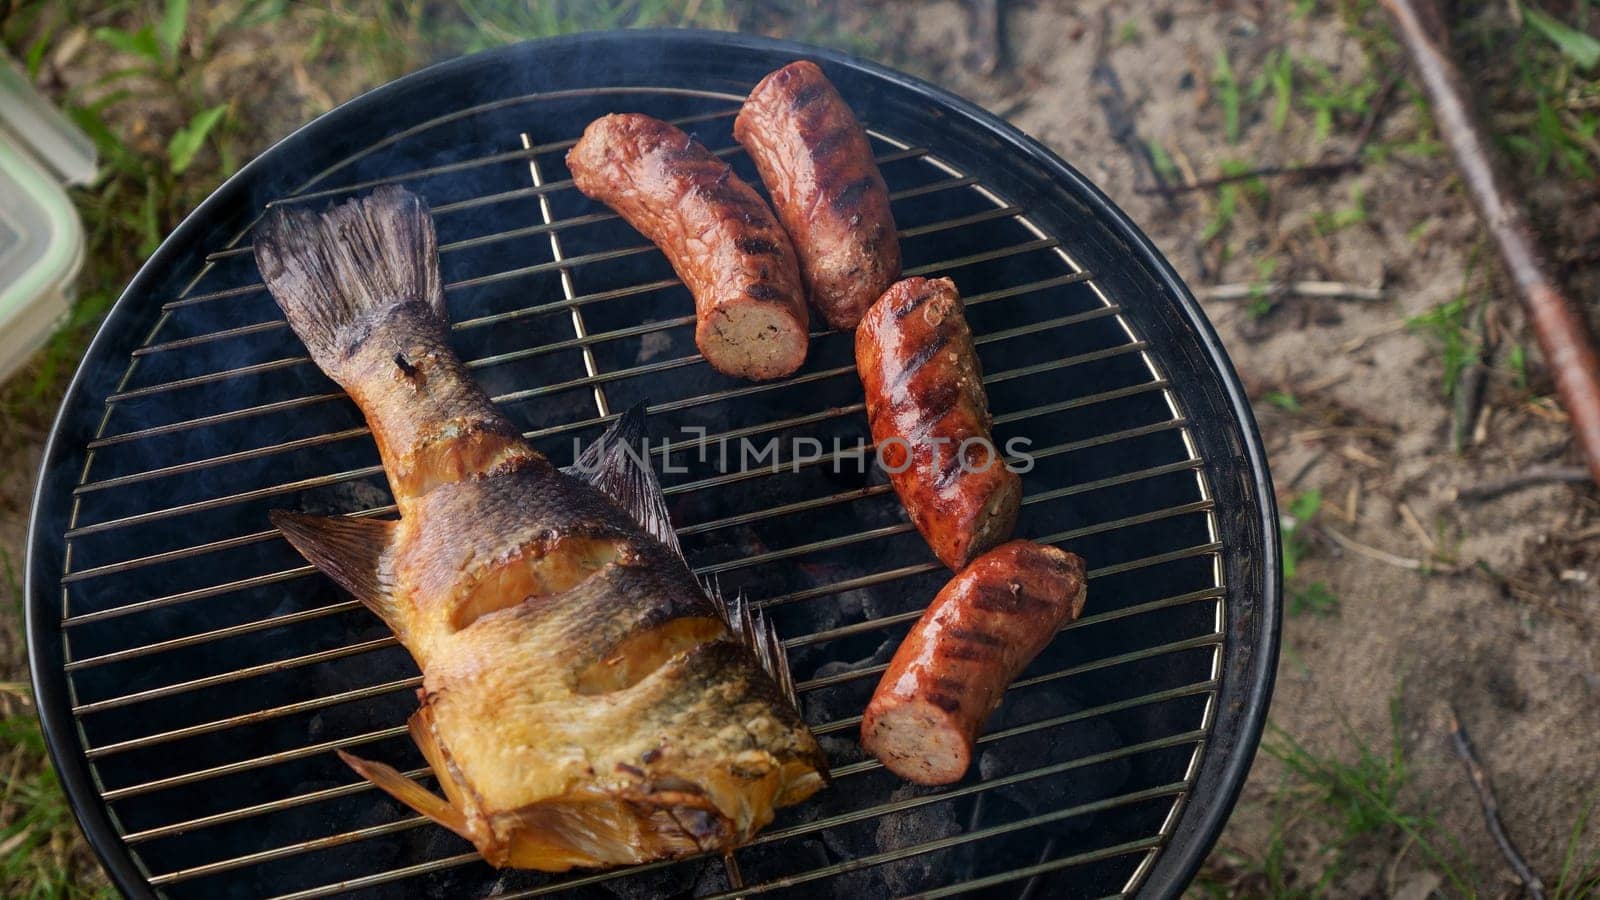 Top view of fresh grilled whole fish, skewer, sausages on round black charcoal grill, green grass background. Barbecue, grill and food concept. Camping with family. by JuliaDorian